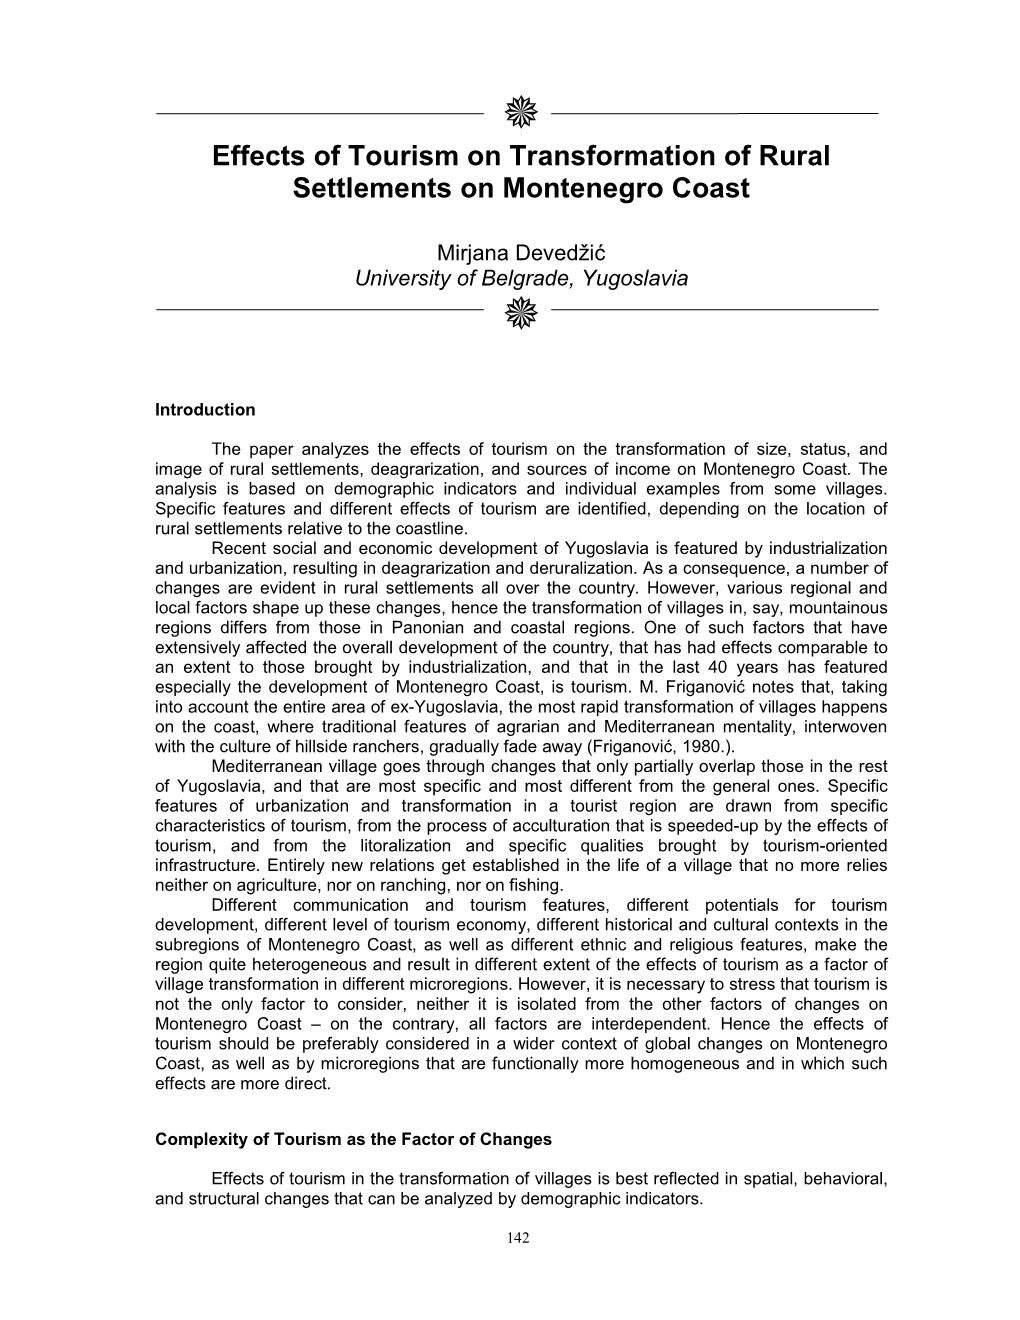 Effects of Tourism on Transformation of Rural Settlements on Montenegro Coast